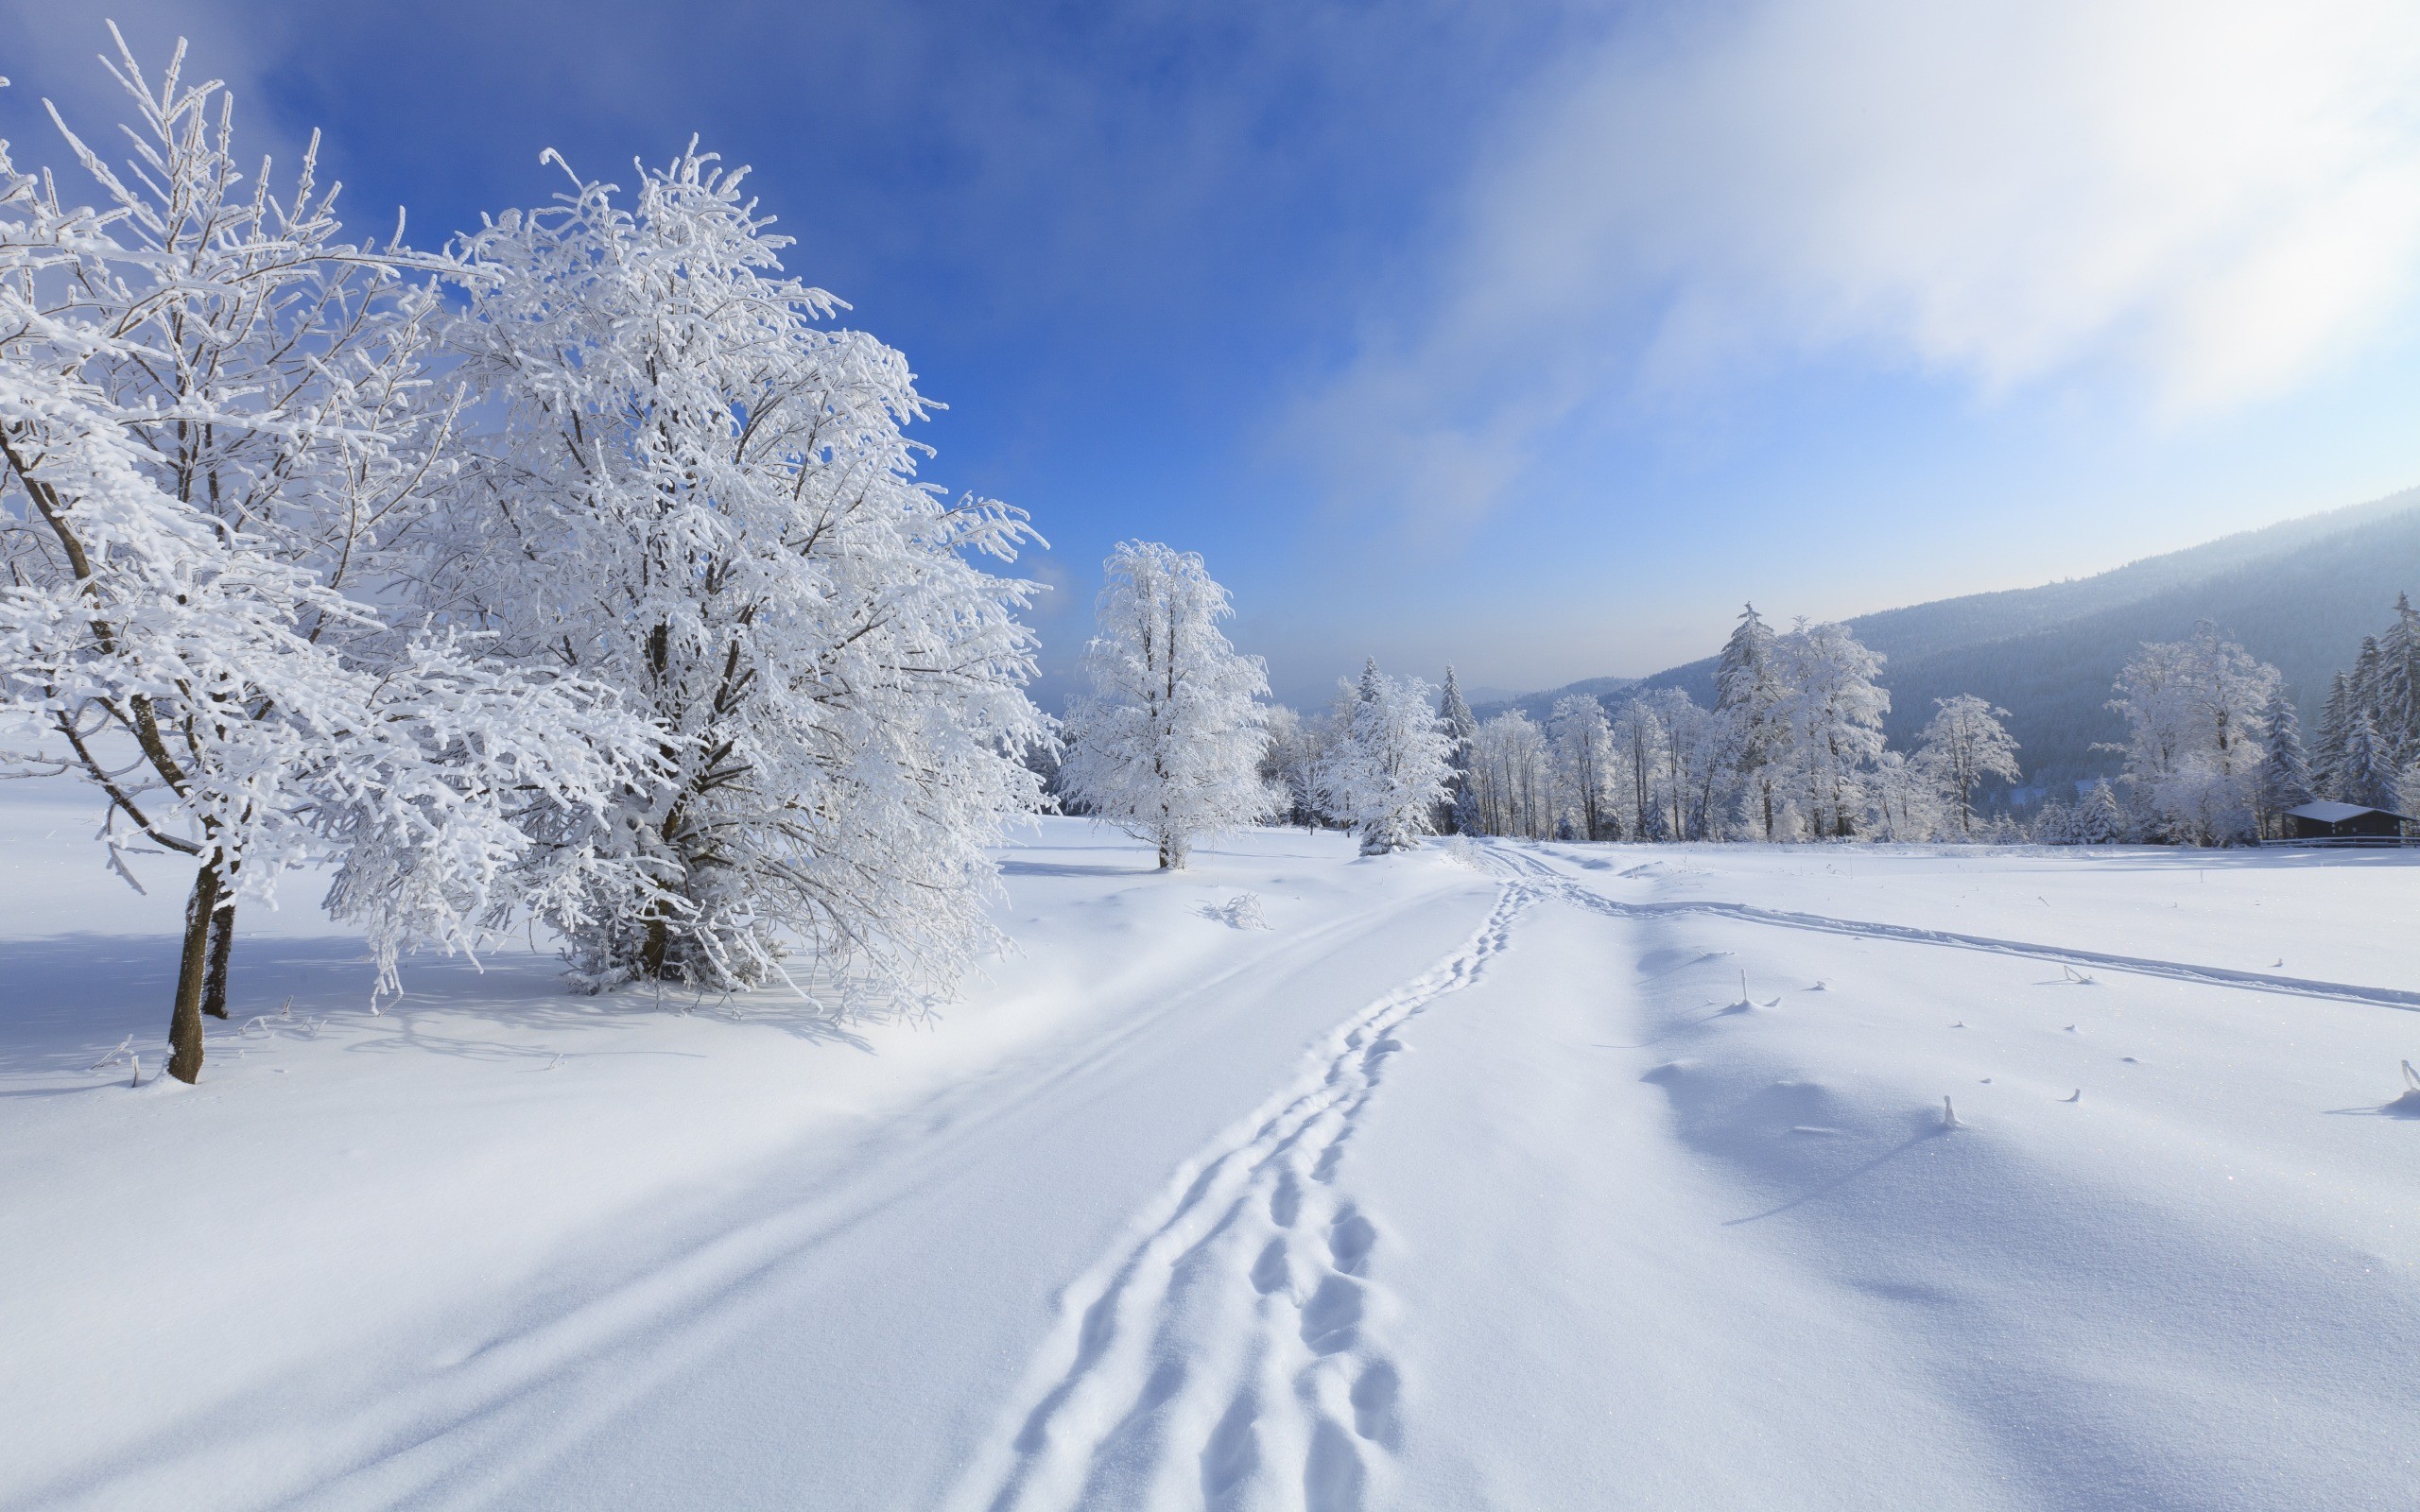 General 2560x1600 snow winter trees path nature cold ice outdoors landscape